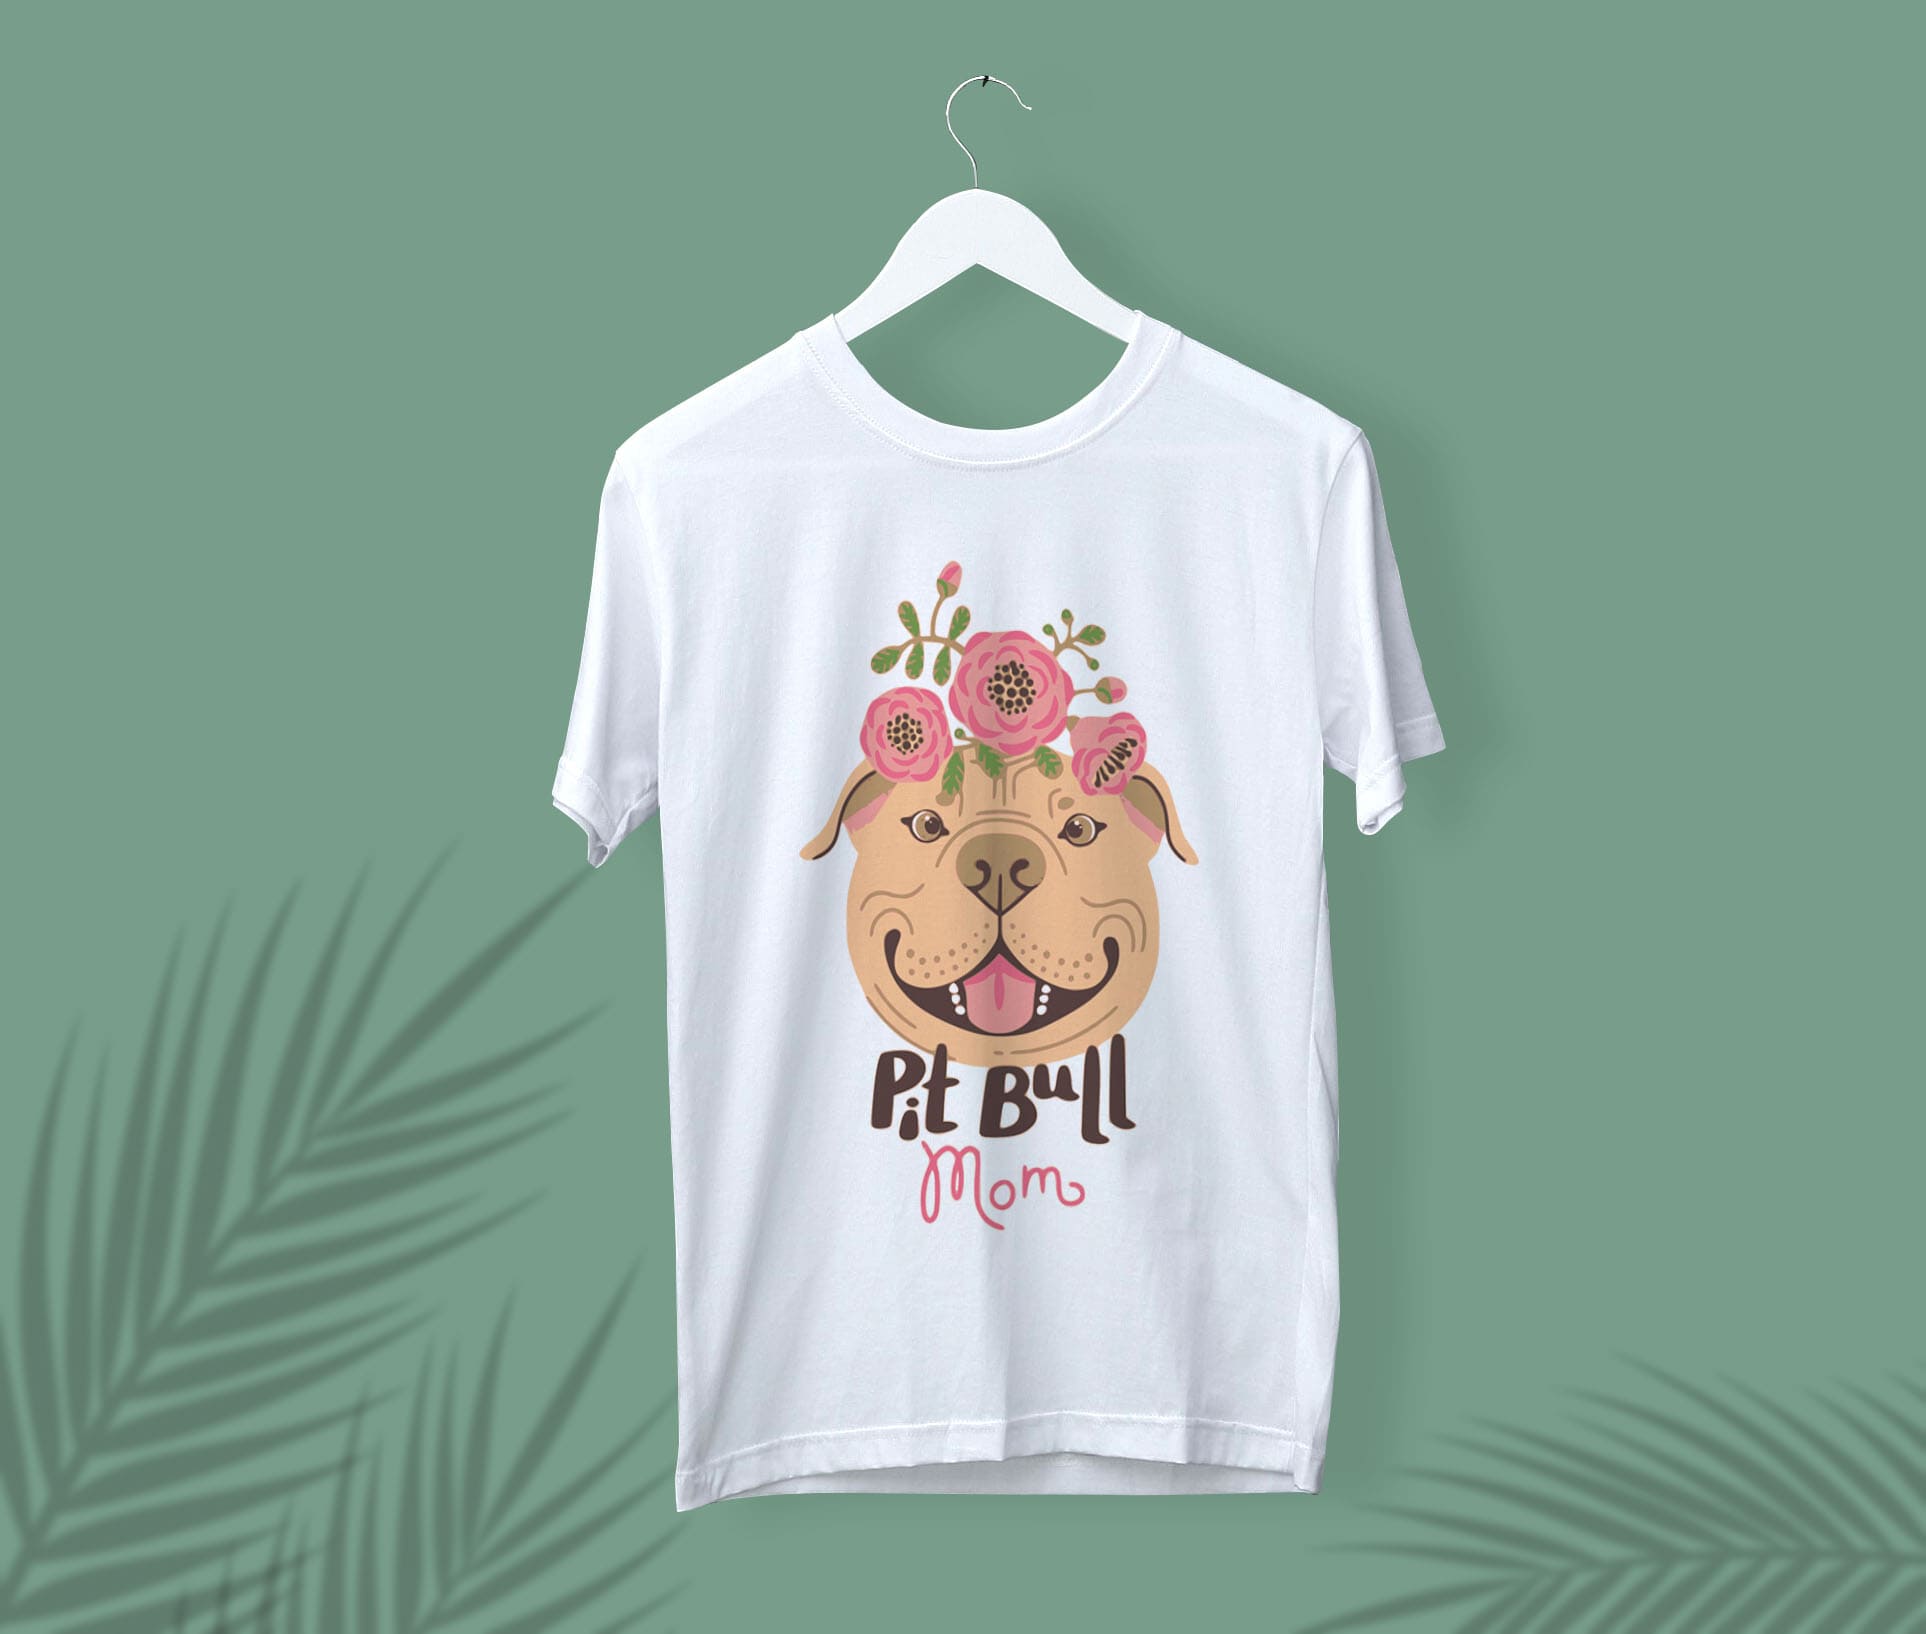 White t-shirt with a pitbull mom face and flowers on a white hanger, on a green background.